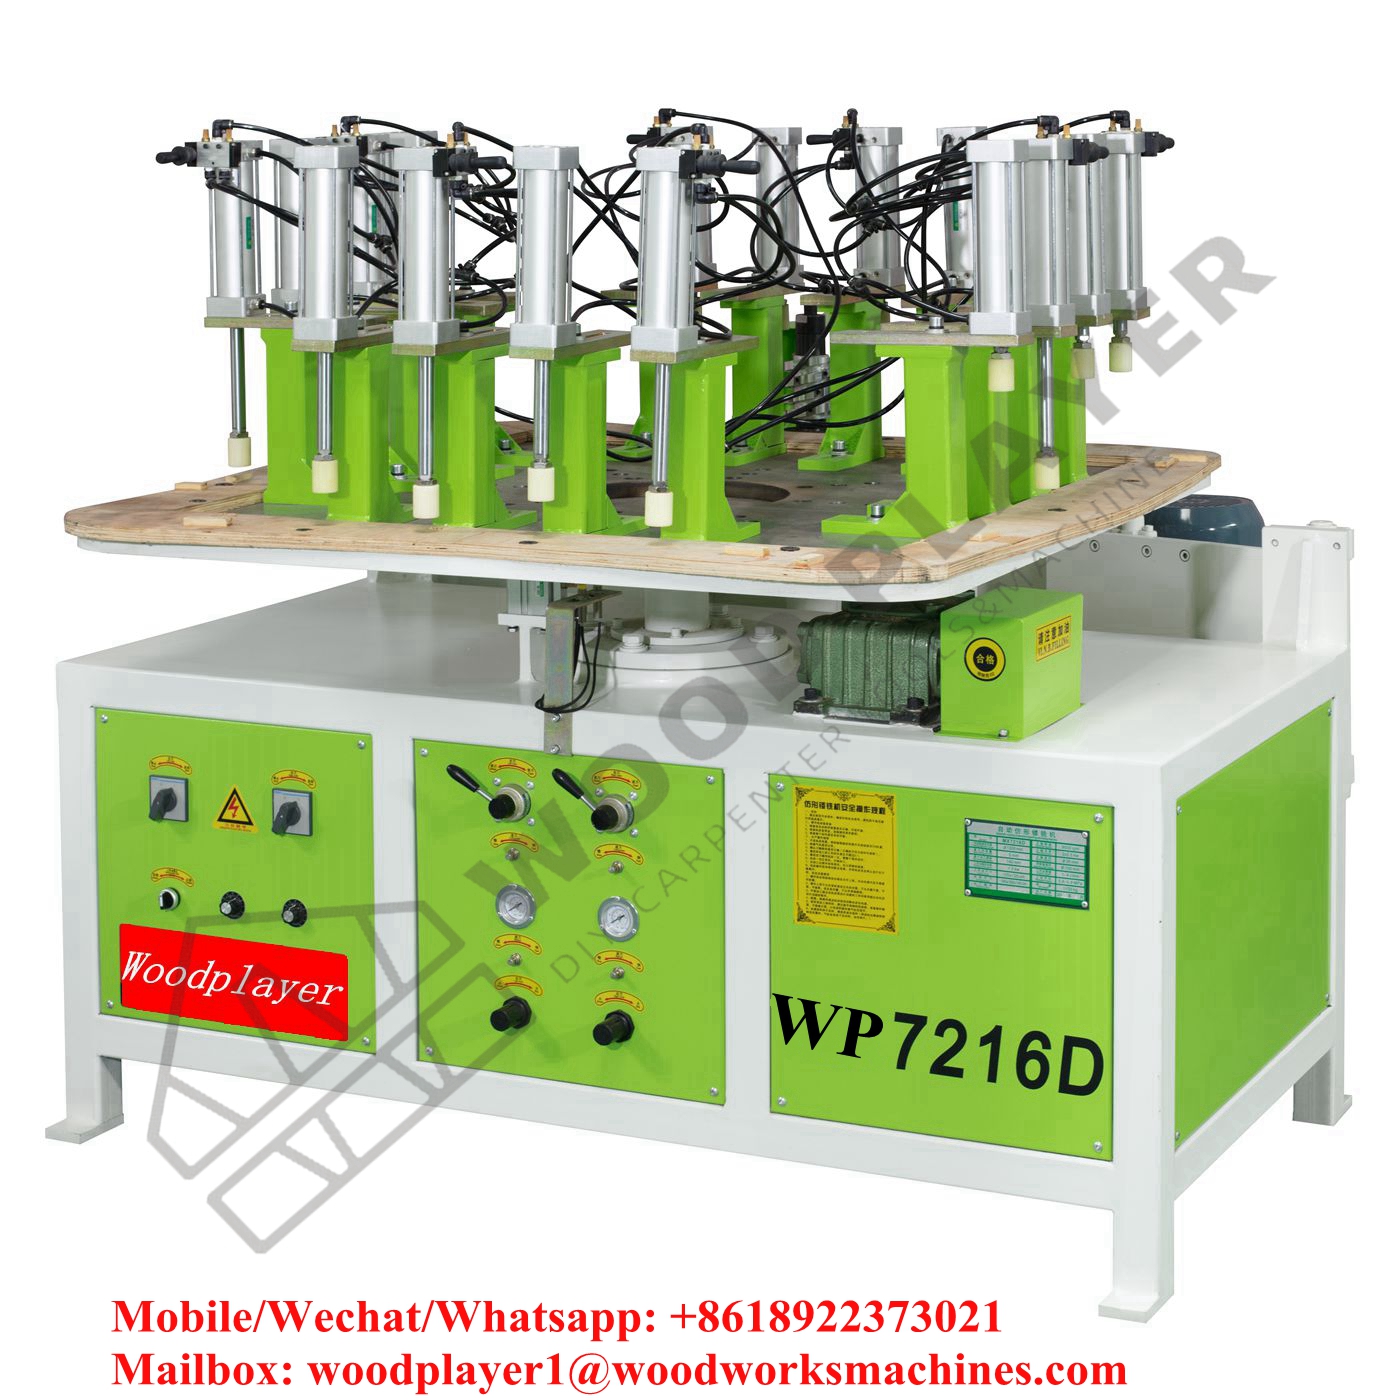 WP7216D Auto Copy Shaper Multi-Functional Automatic Profiling Gong-Milling Machine For Woodworking Machinery